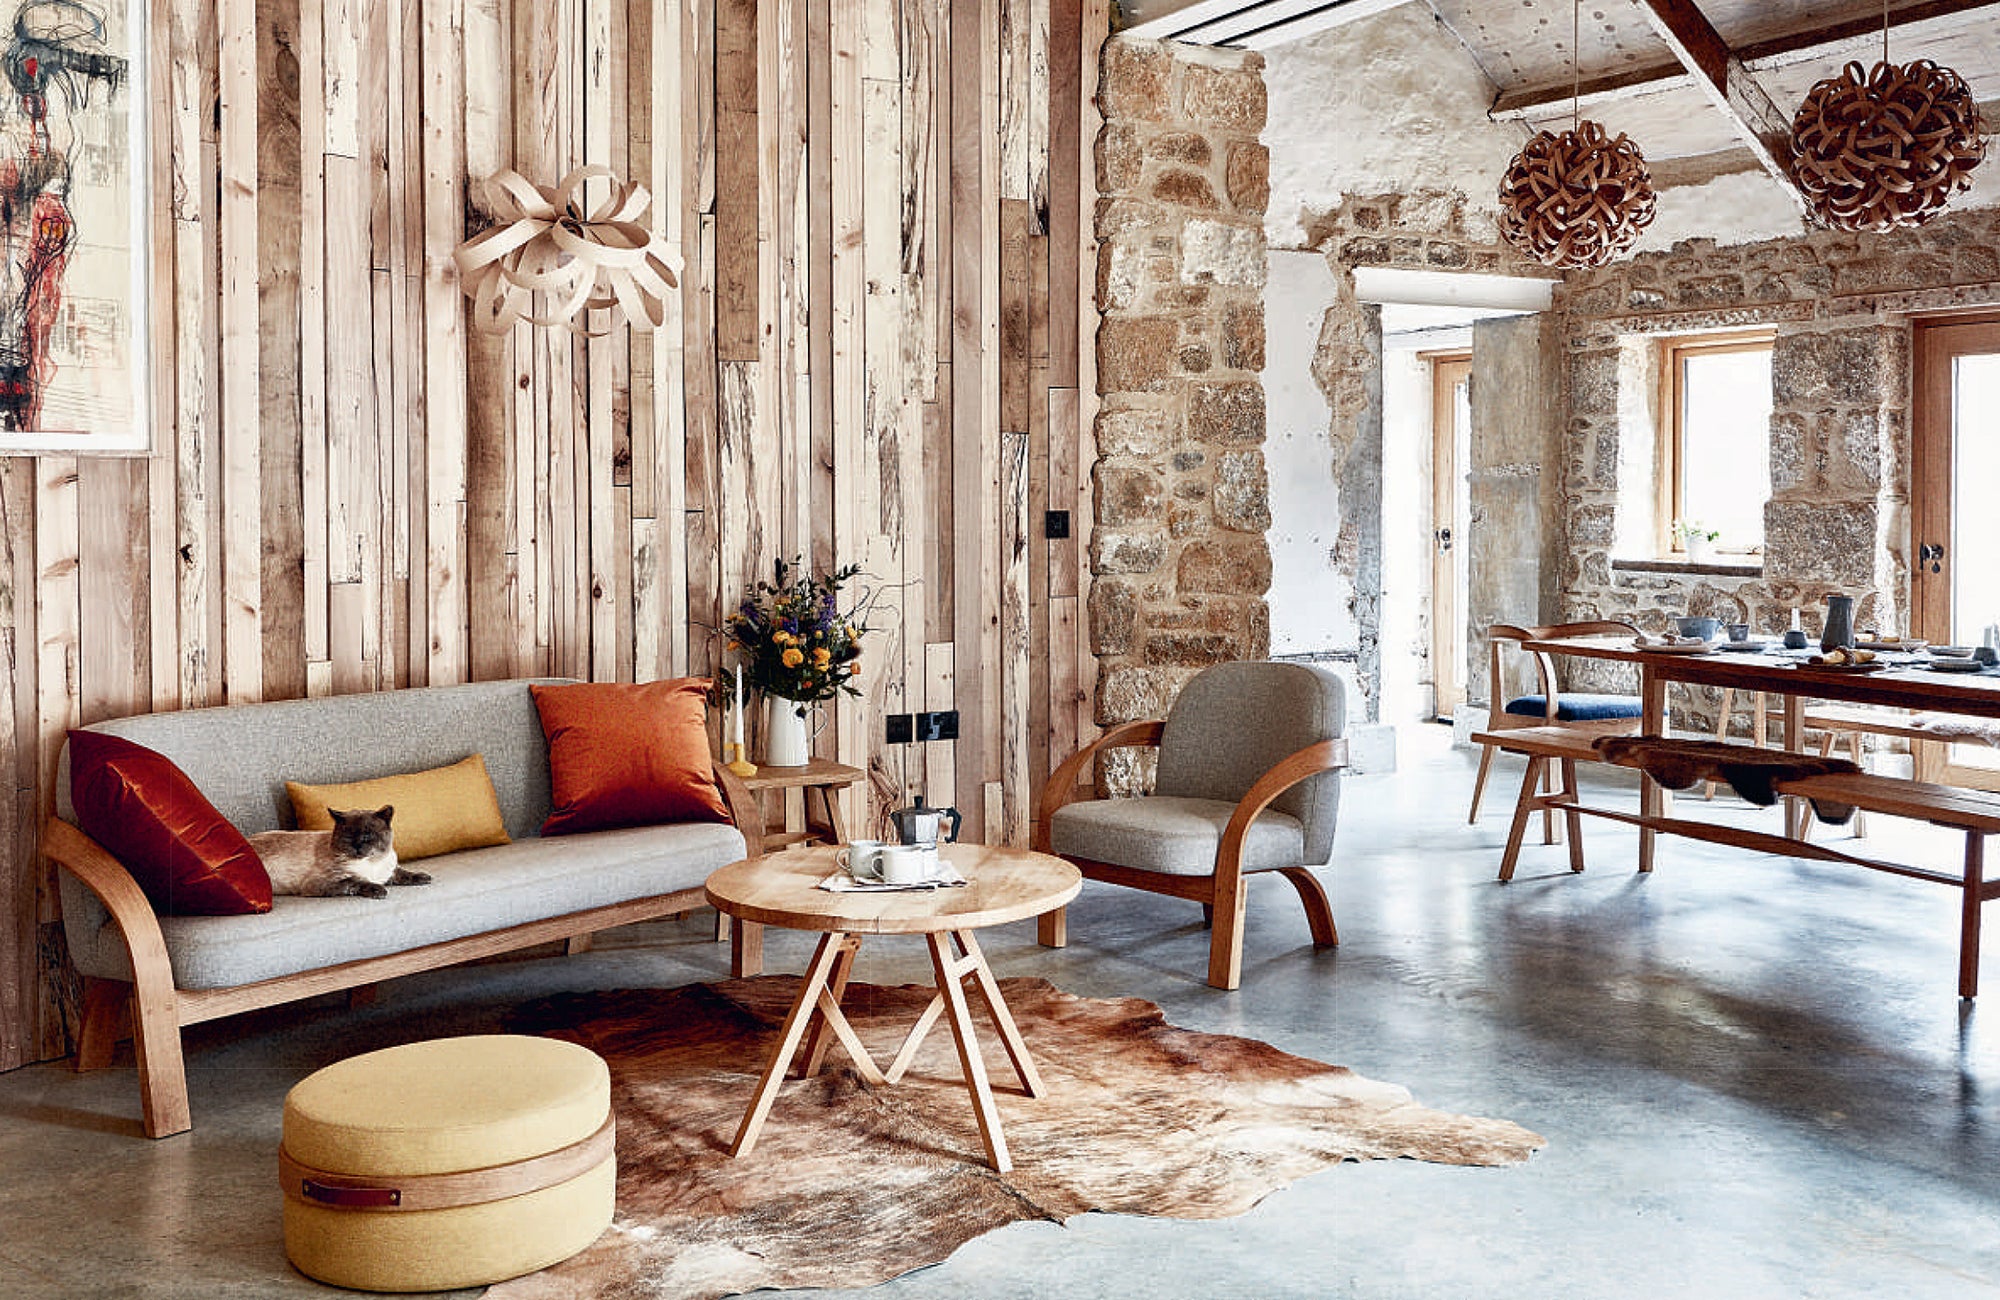 Tom Raffield steam bent home in Country Living a Modern Rustic